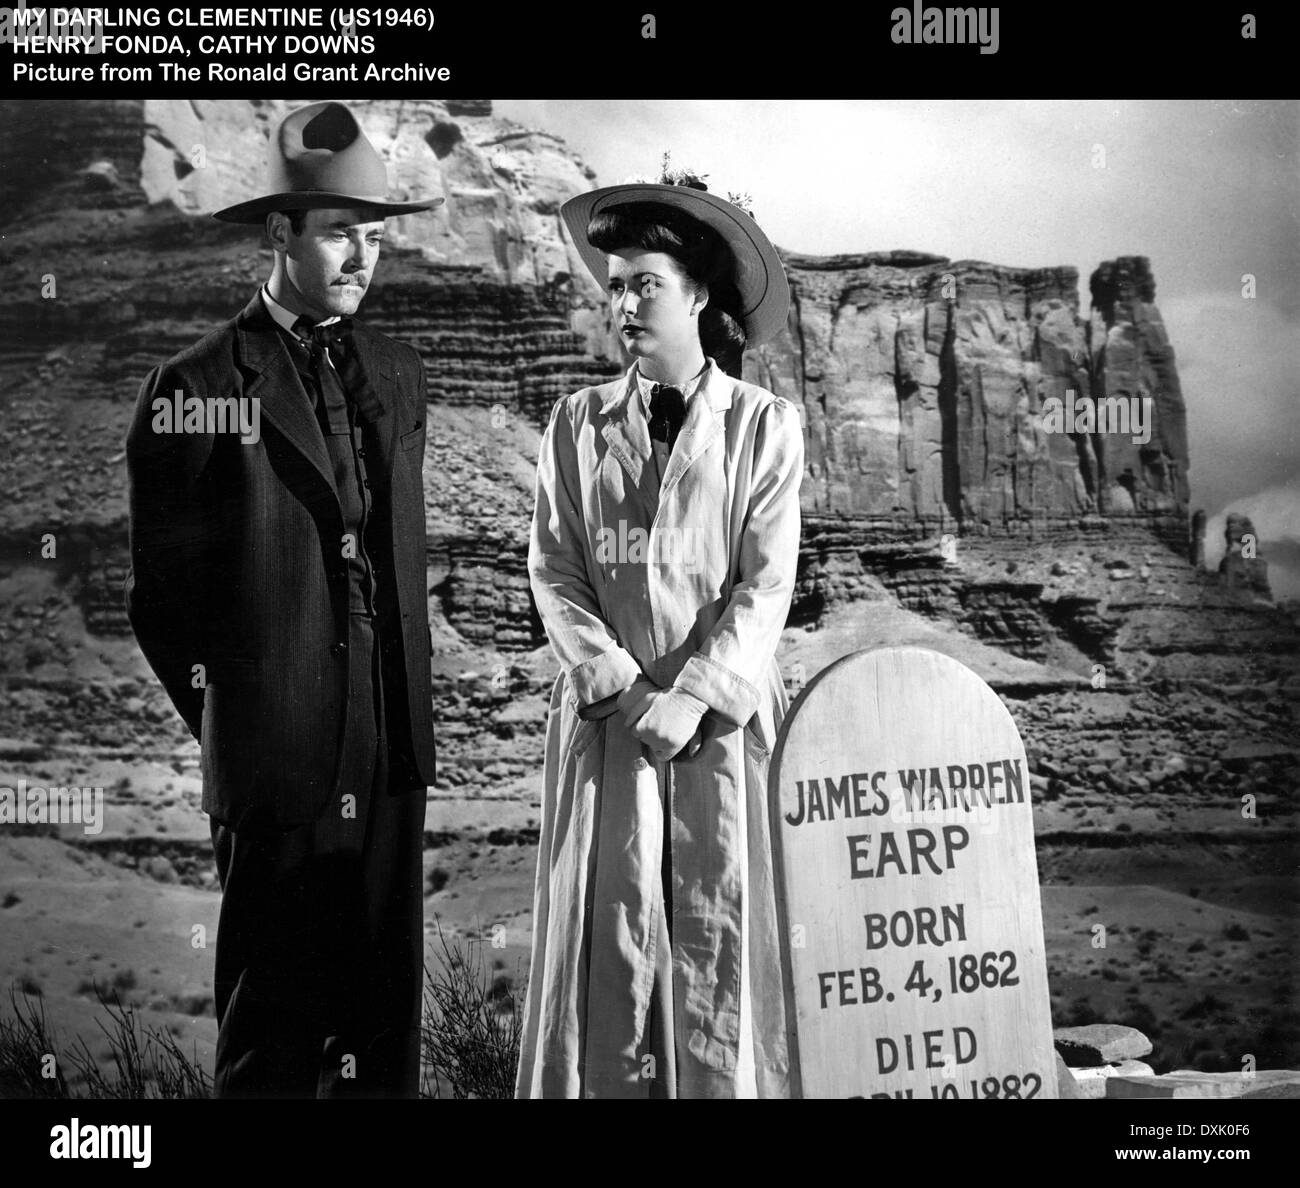 MY DARLING CLEMENTINE Banque D'Images